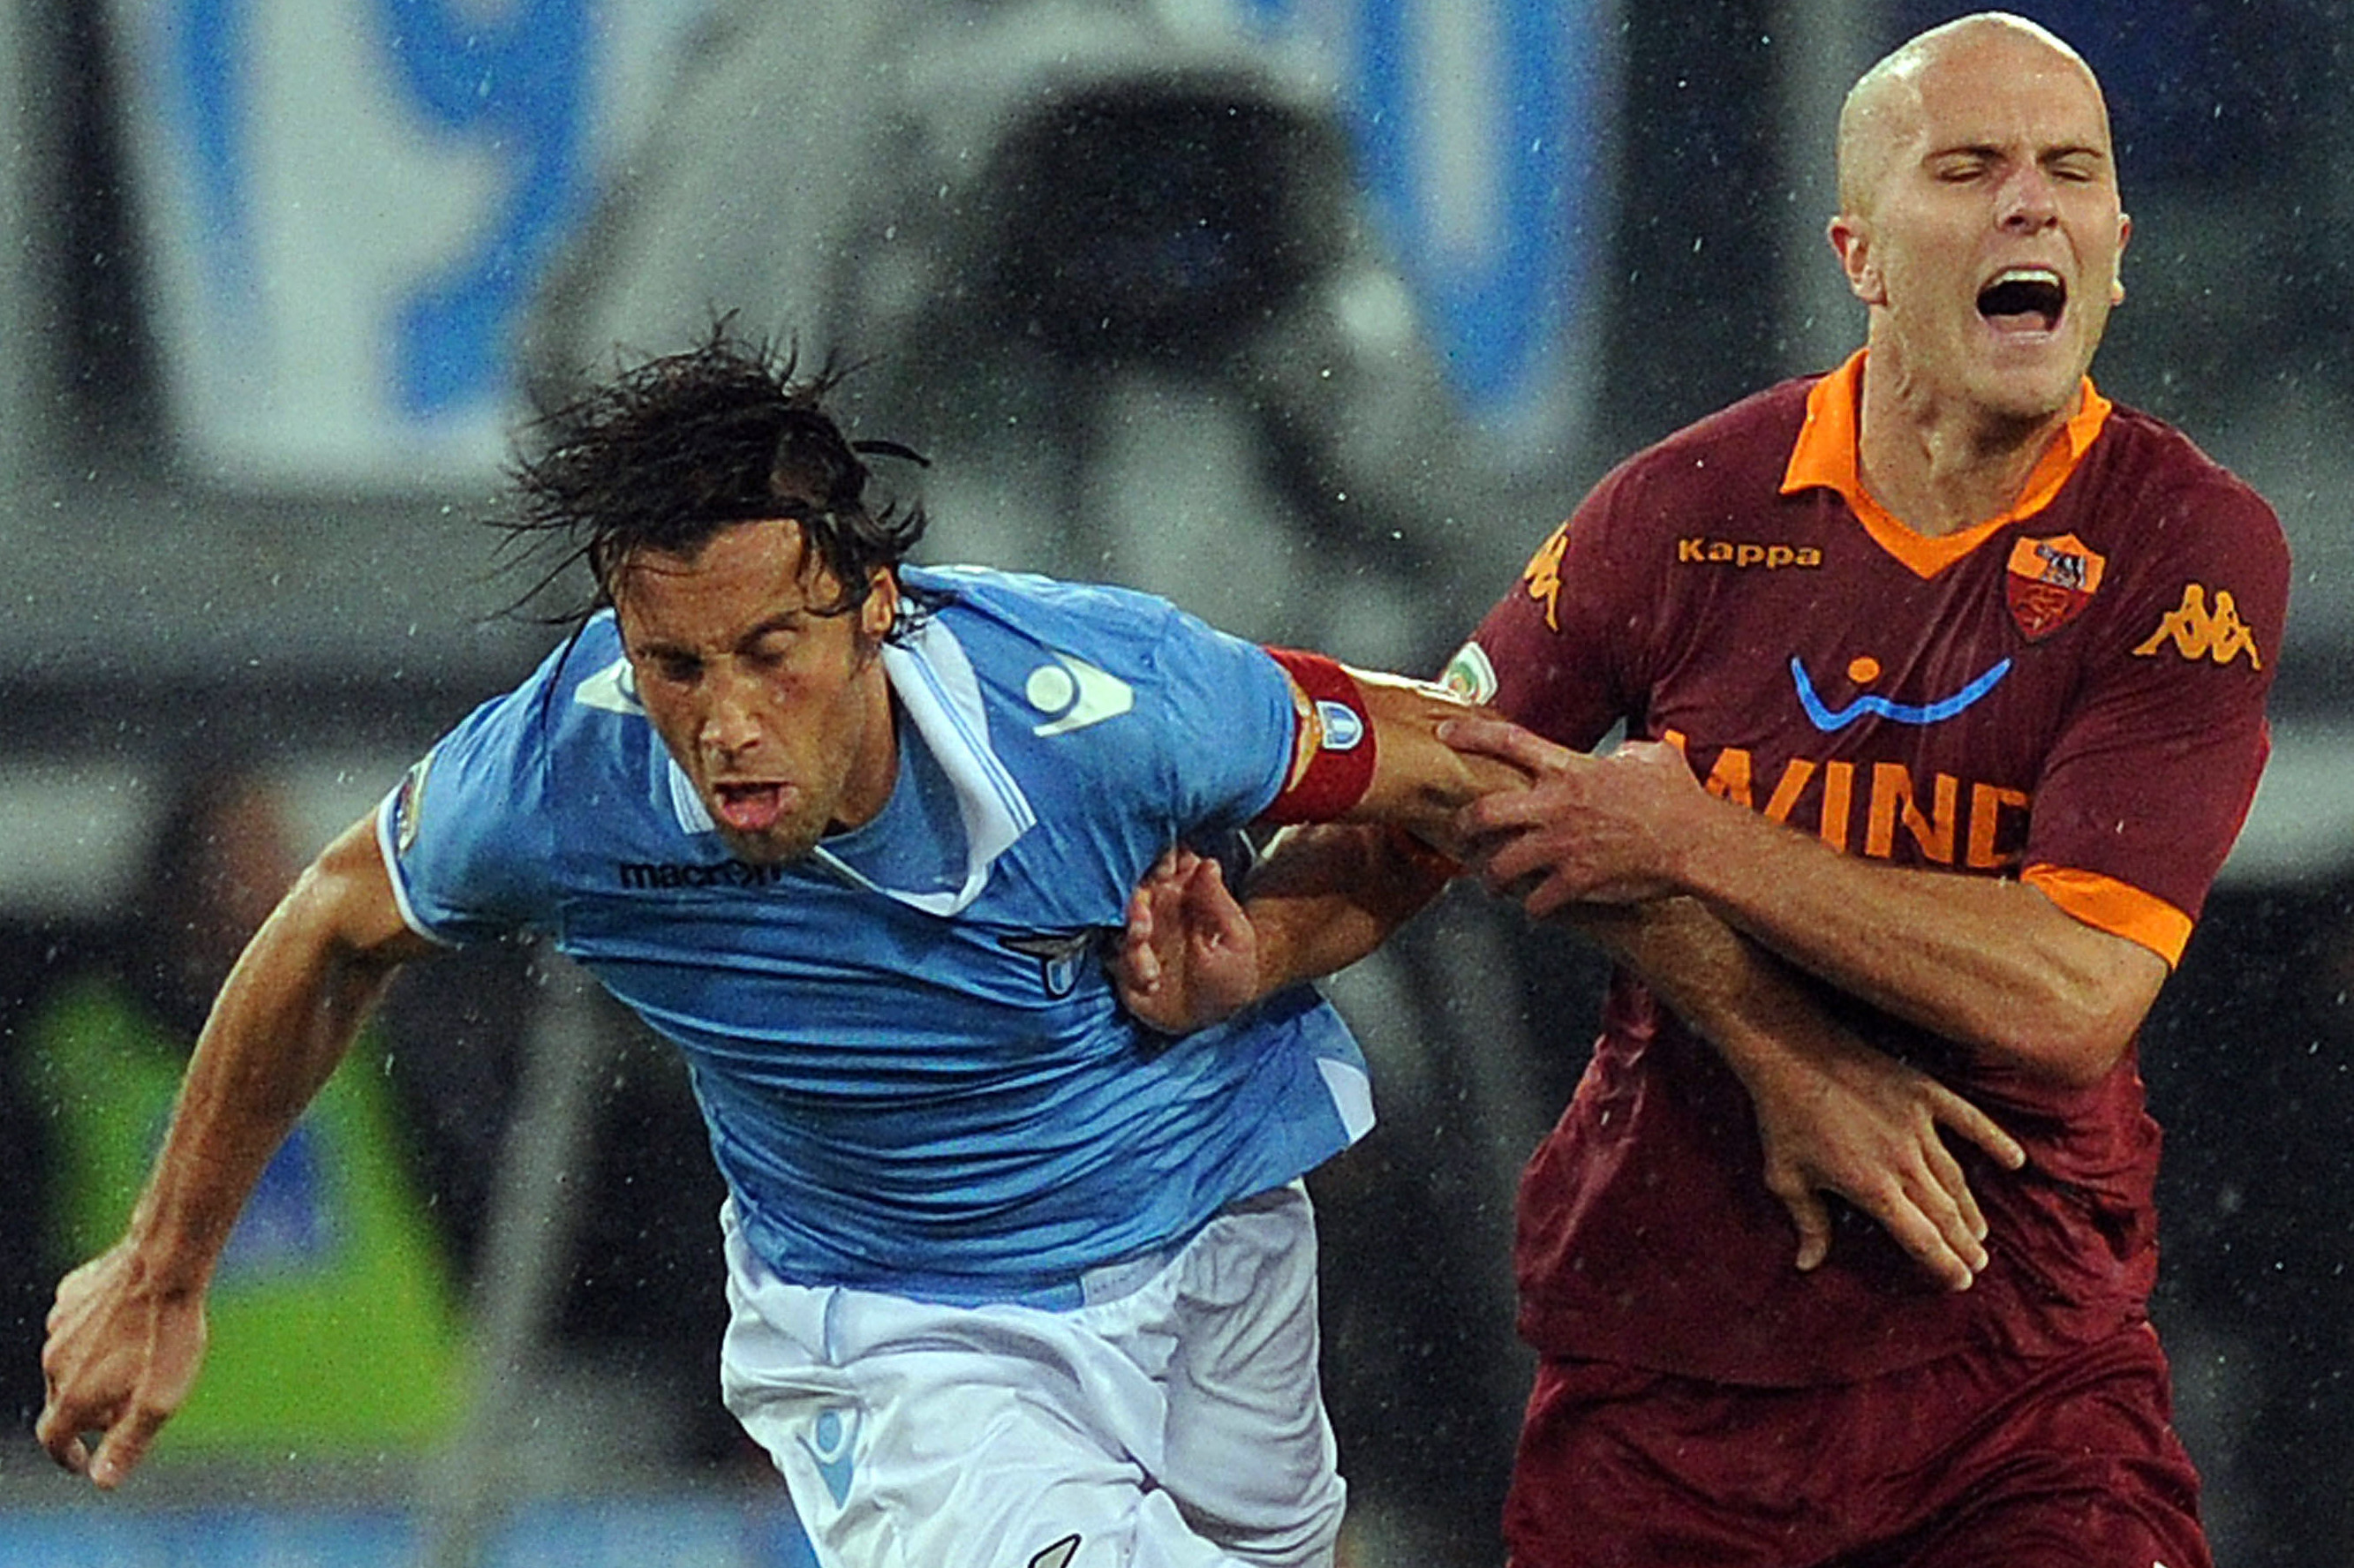 Serie A has become the Serie B of Europe' - How Italian football descended  into disarray